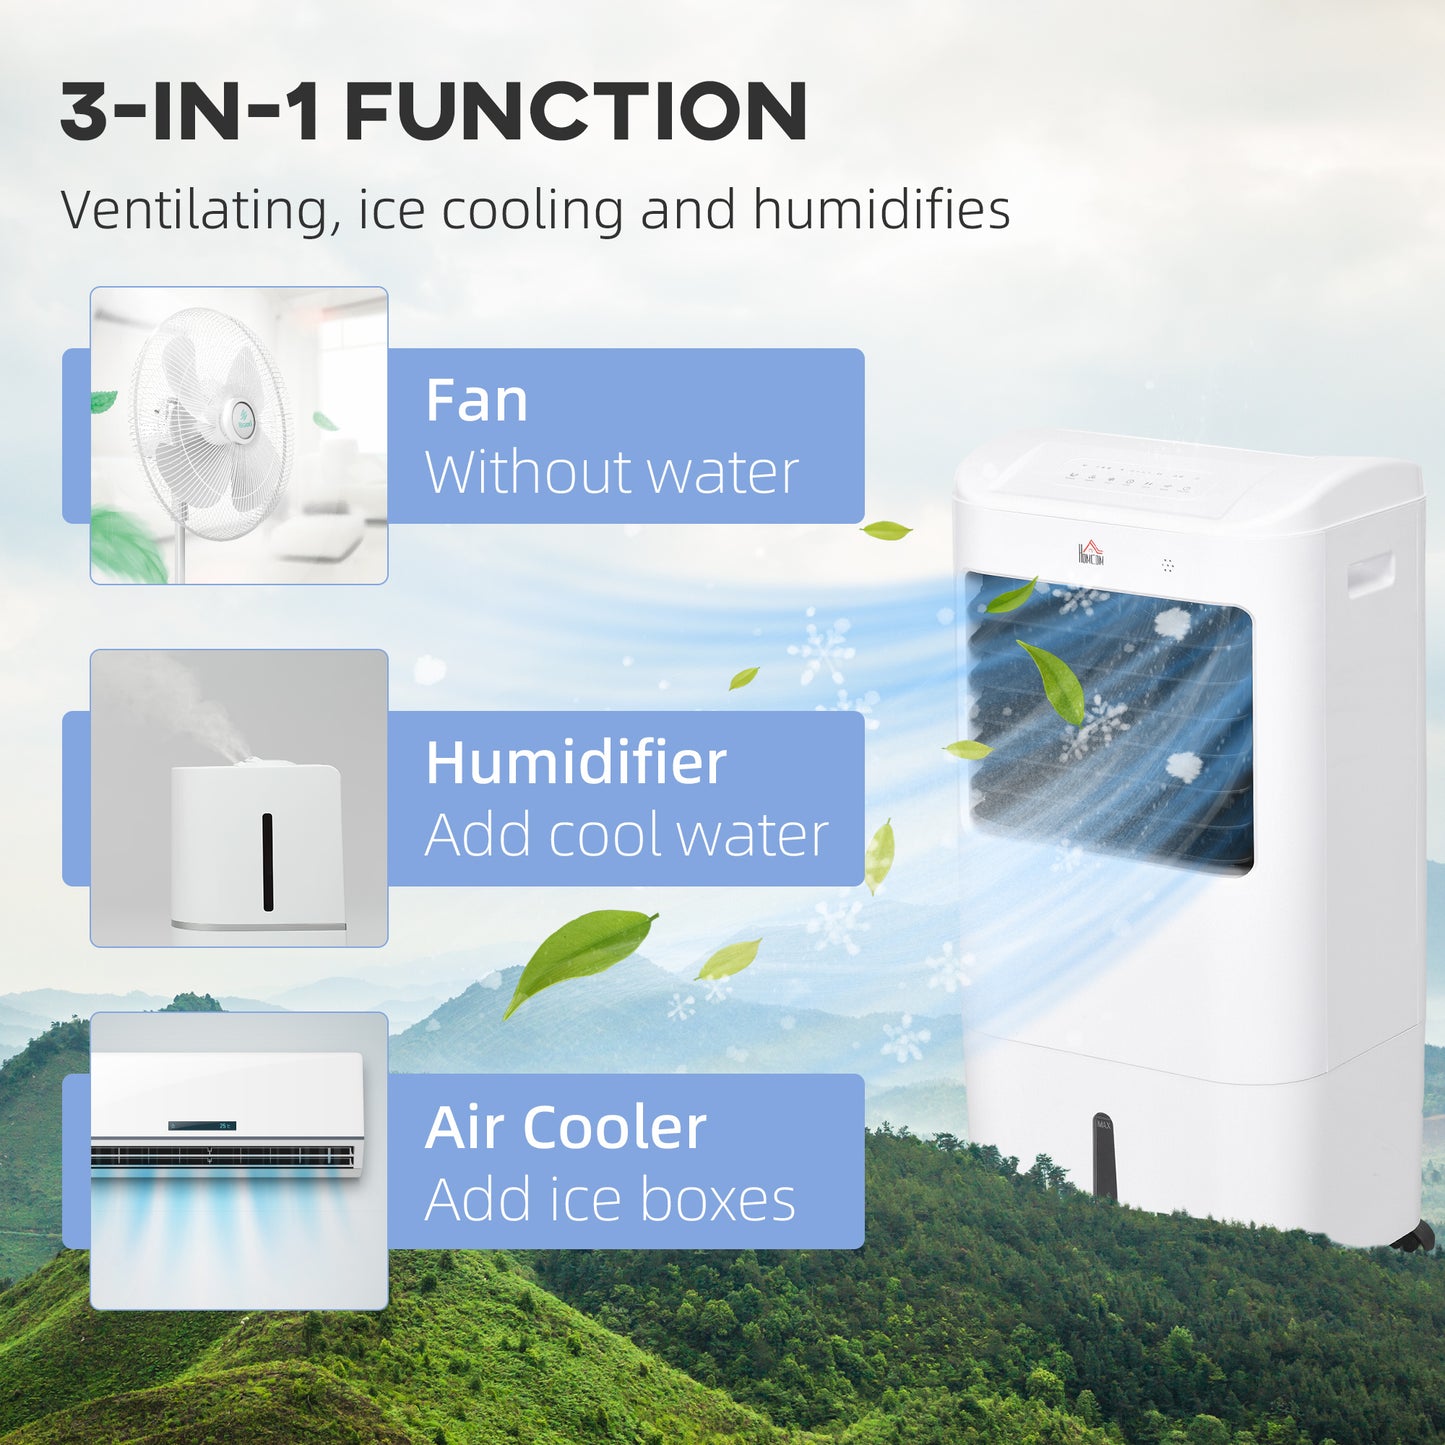 HOMCOM 78cm Portable Evaporative Air Cooler, 3-In-1 Ice Cooling Fan Cooler, Water Conditioner Humidifier Unit with Remote, 7.5H Timer, Oscillating, LED Display, 15L Water Tank for Home, White